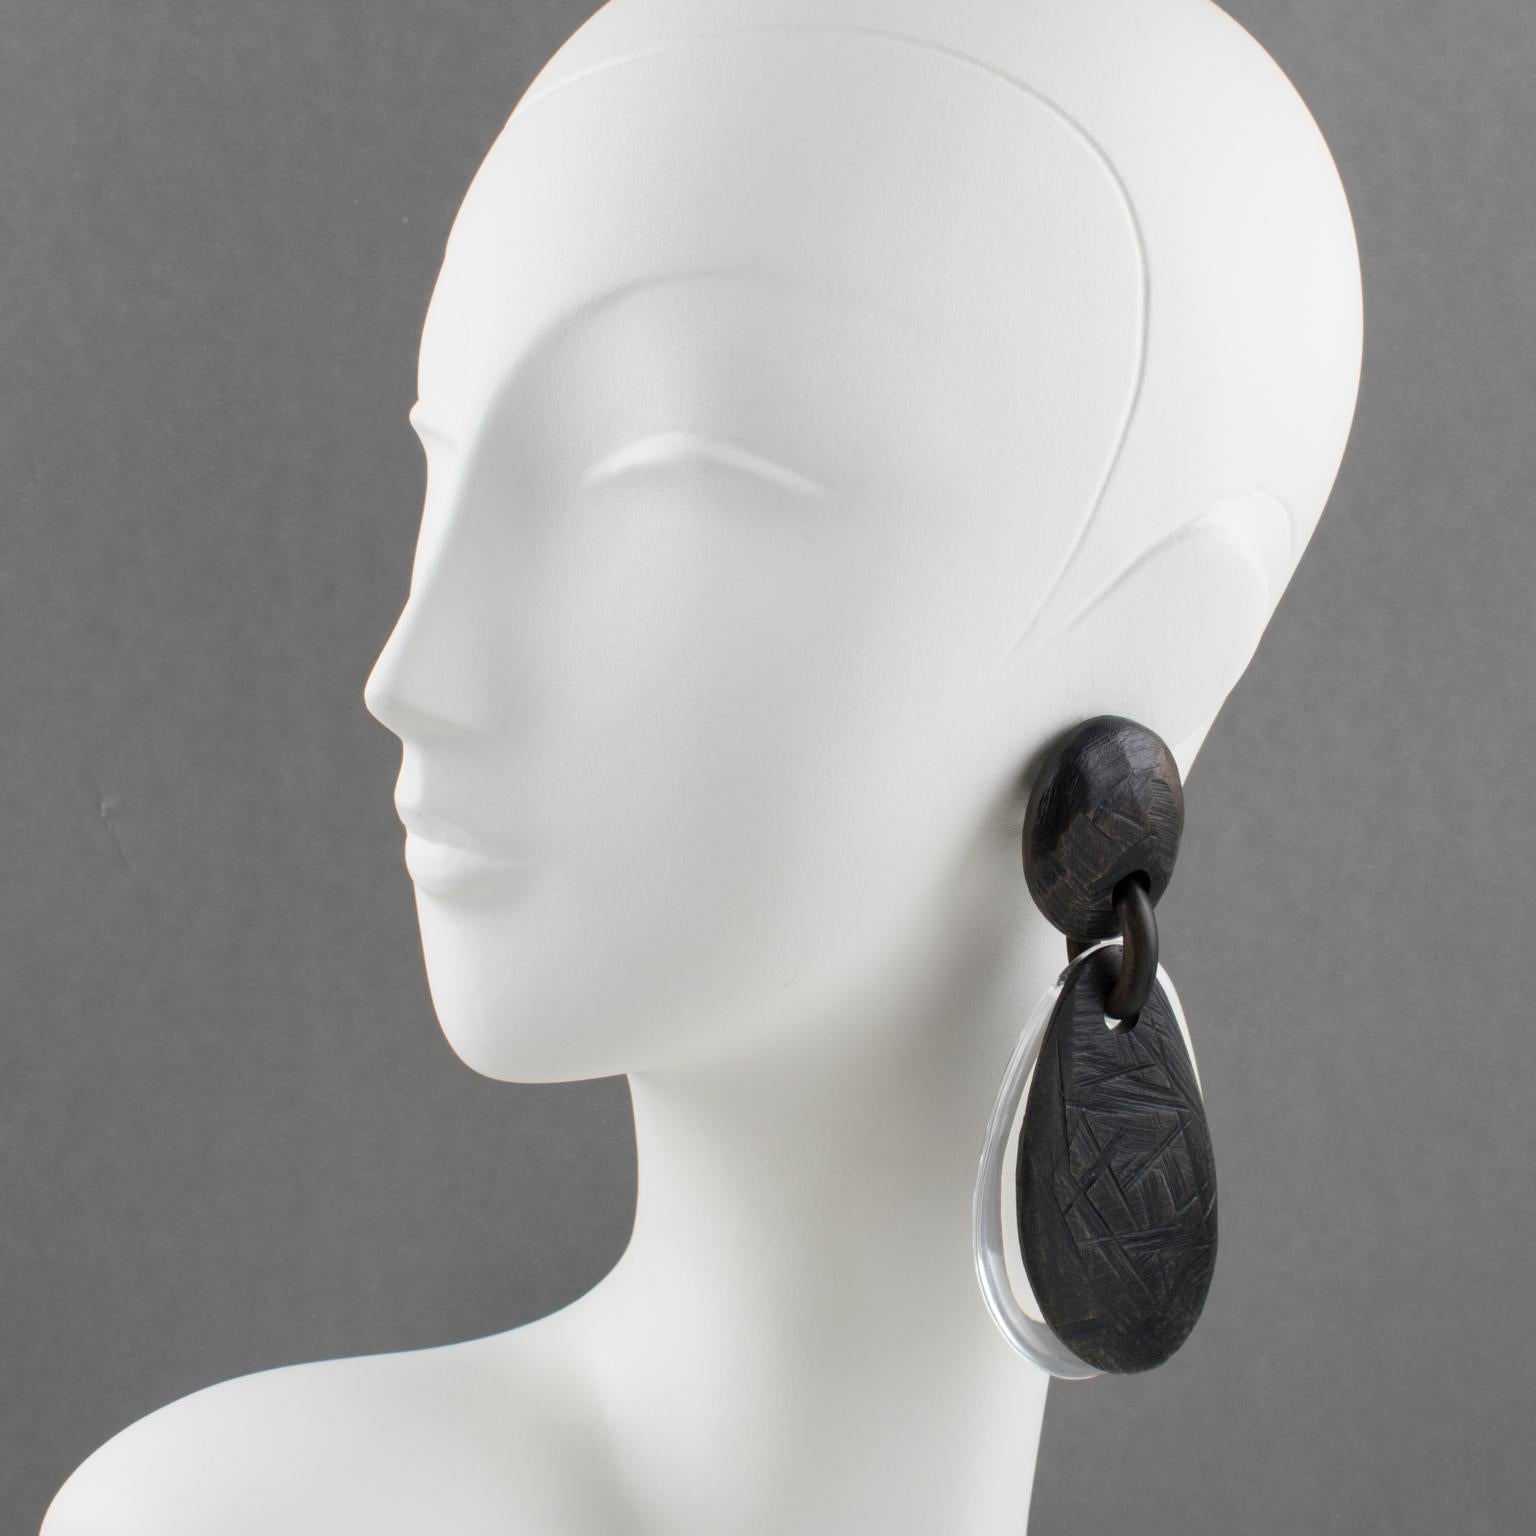 These spectacular oversized clip-on earrings by Gerda Lyngaard for Monies feature a dangling pebble double teardrop shape built with transparent Acrylic or Lucite and Ebony wood with tribal carved texture. The pieces are marked 